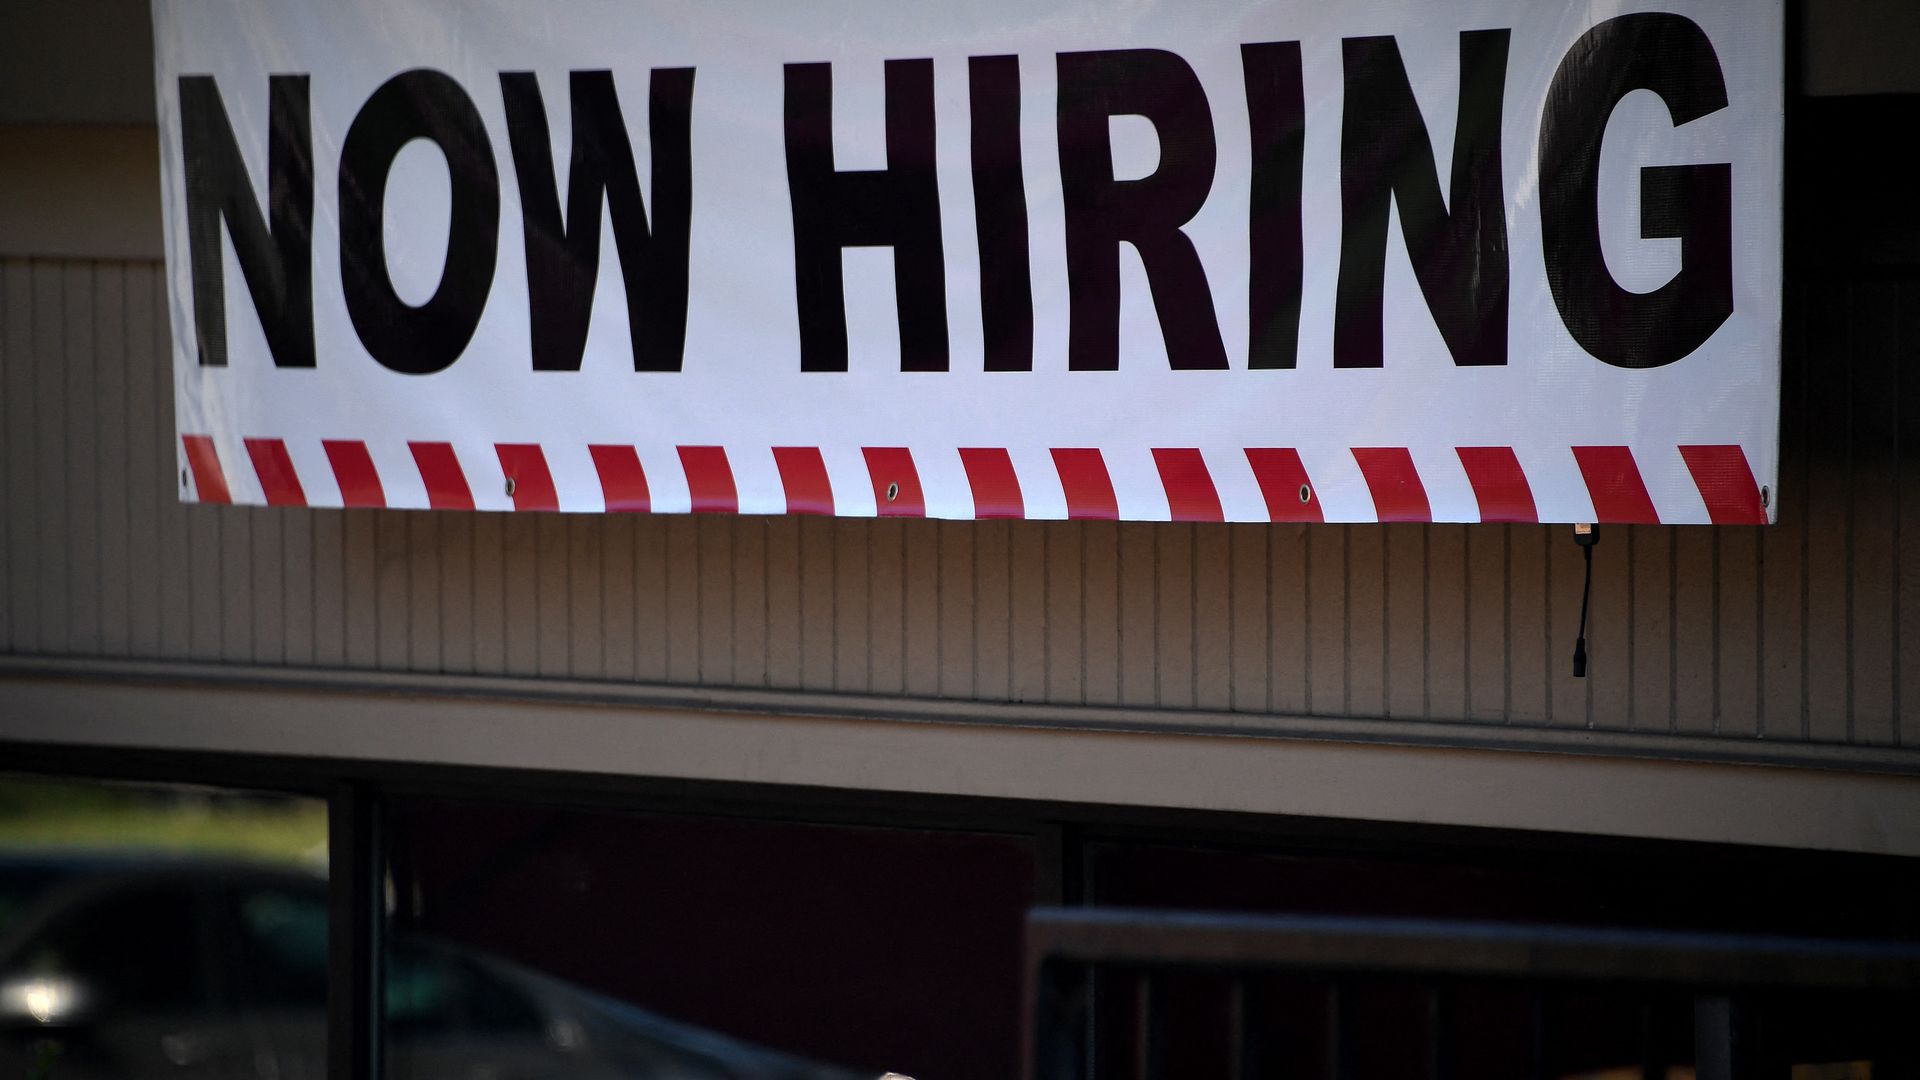 Photo of a white banner that says "Now Hiring" draped over the top of a restaurant